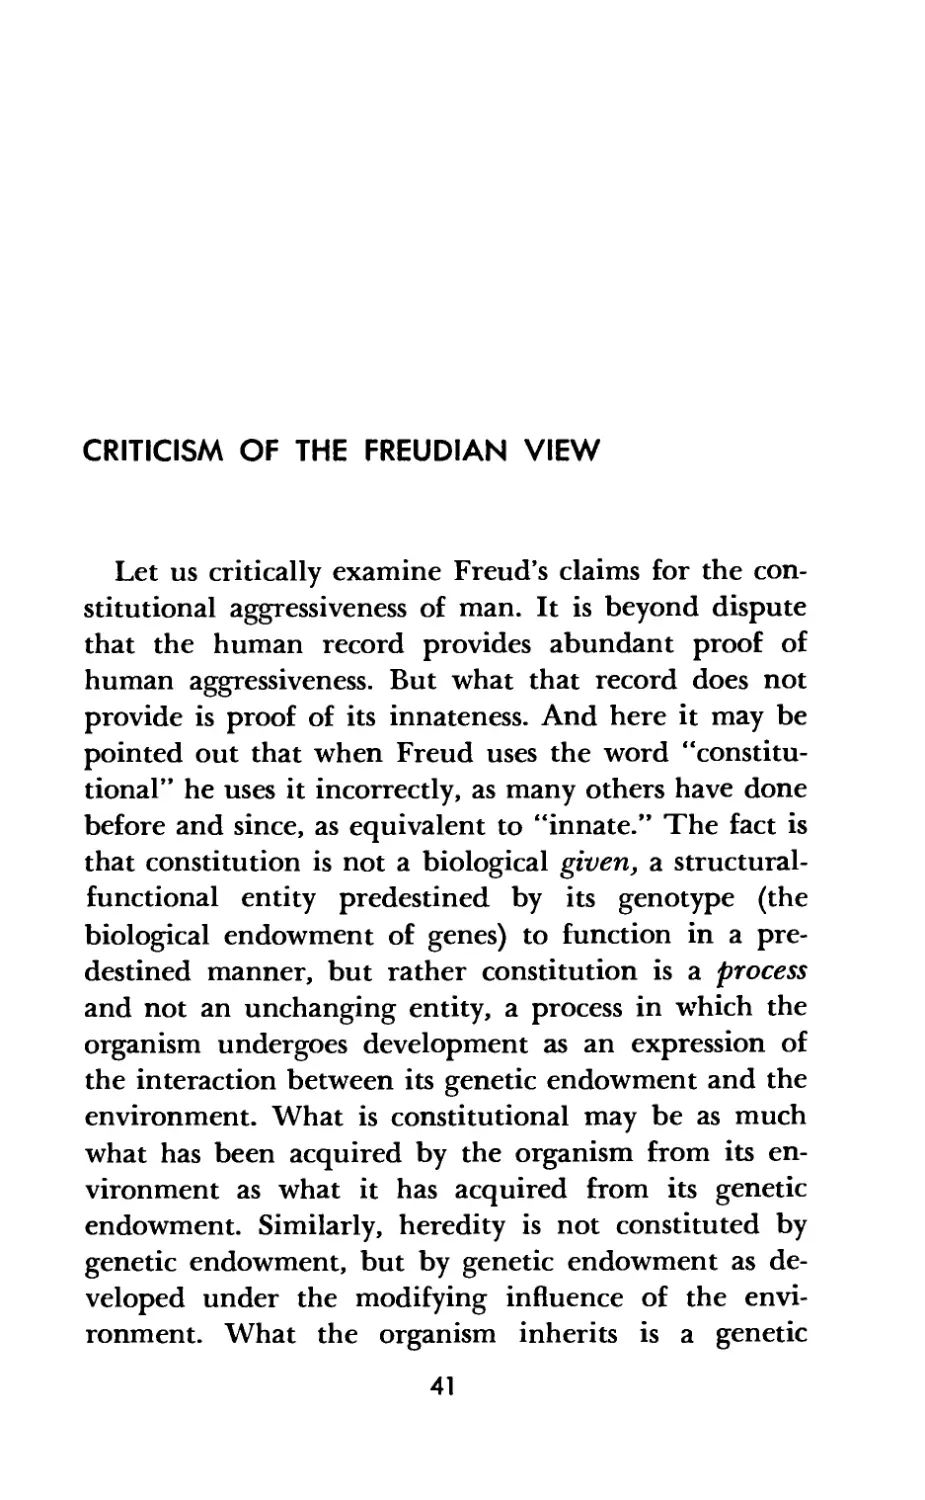 Criticism of the Freudian View